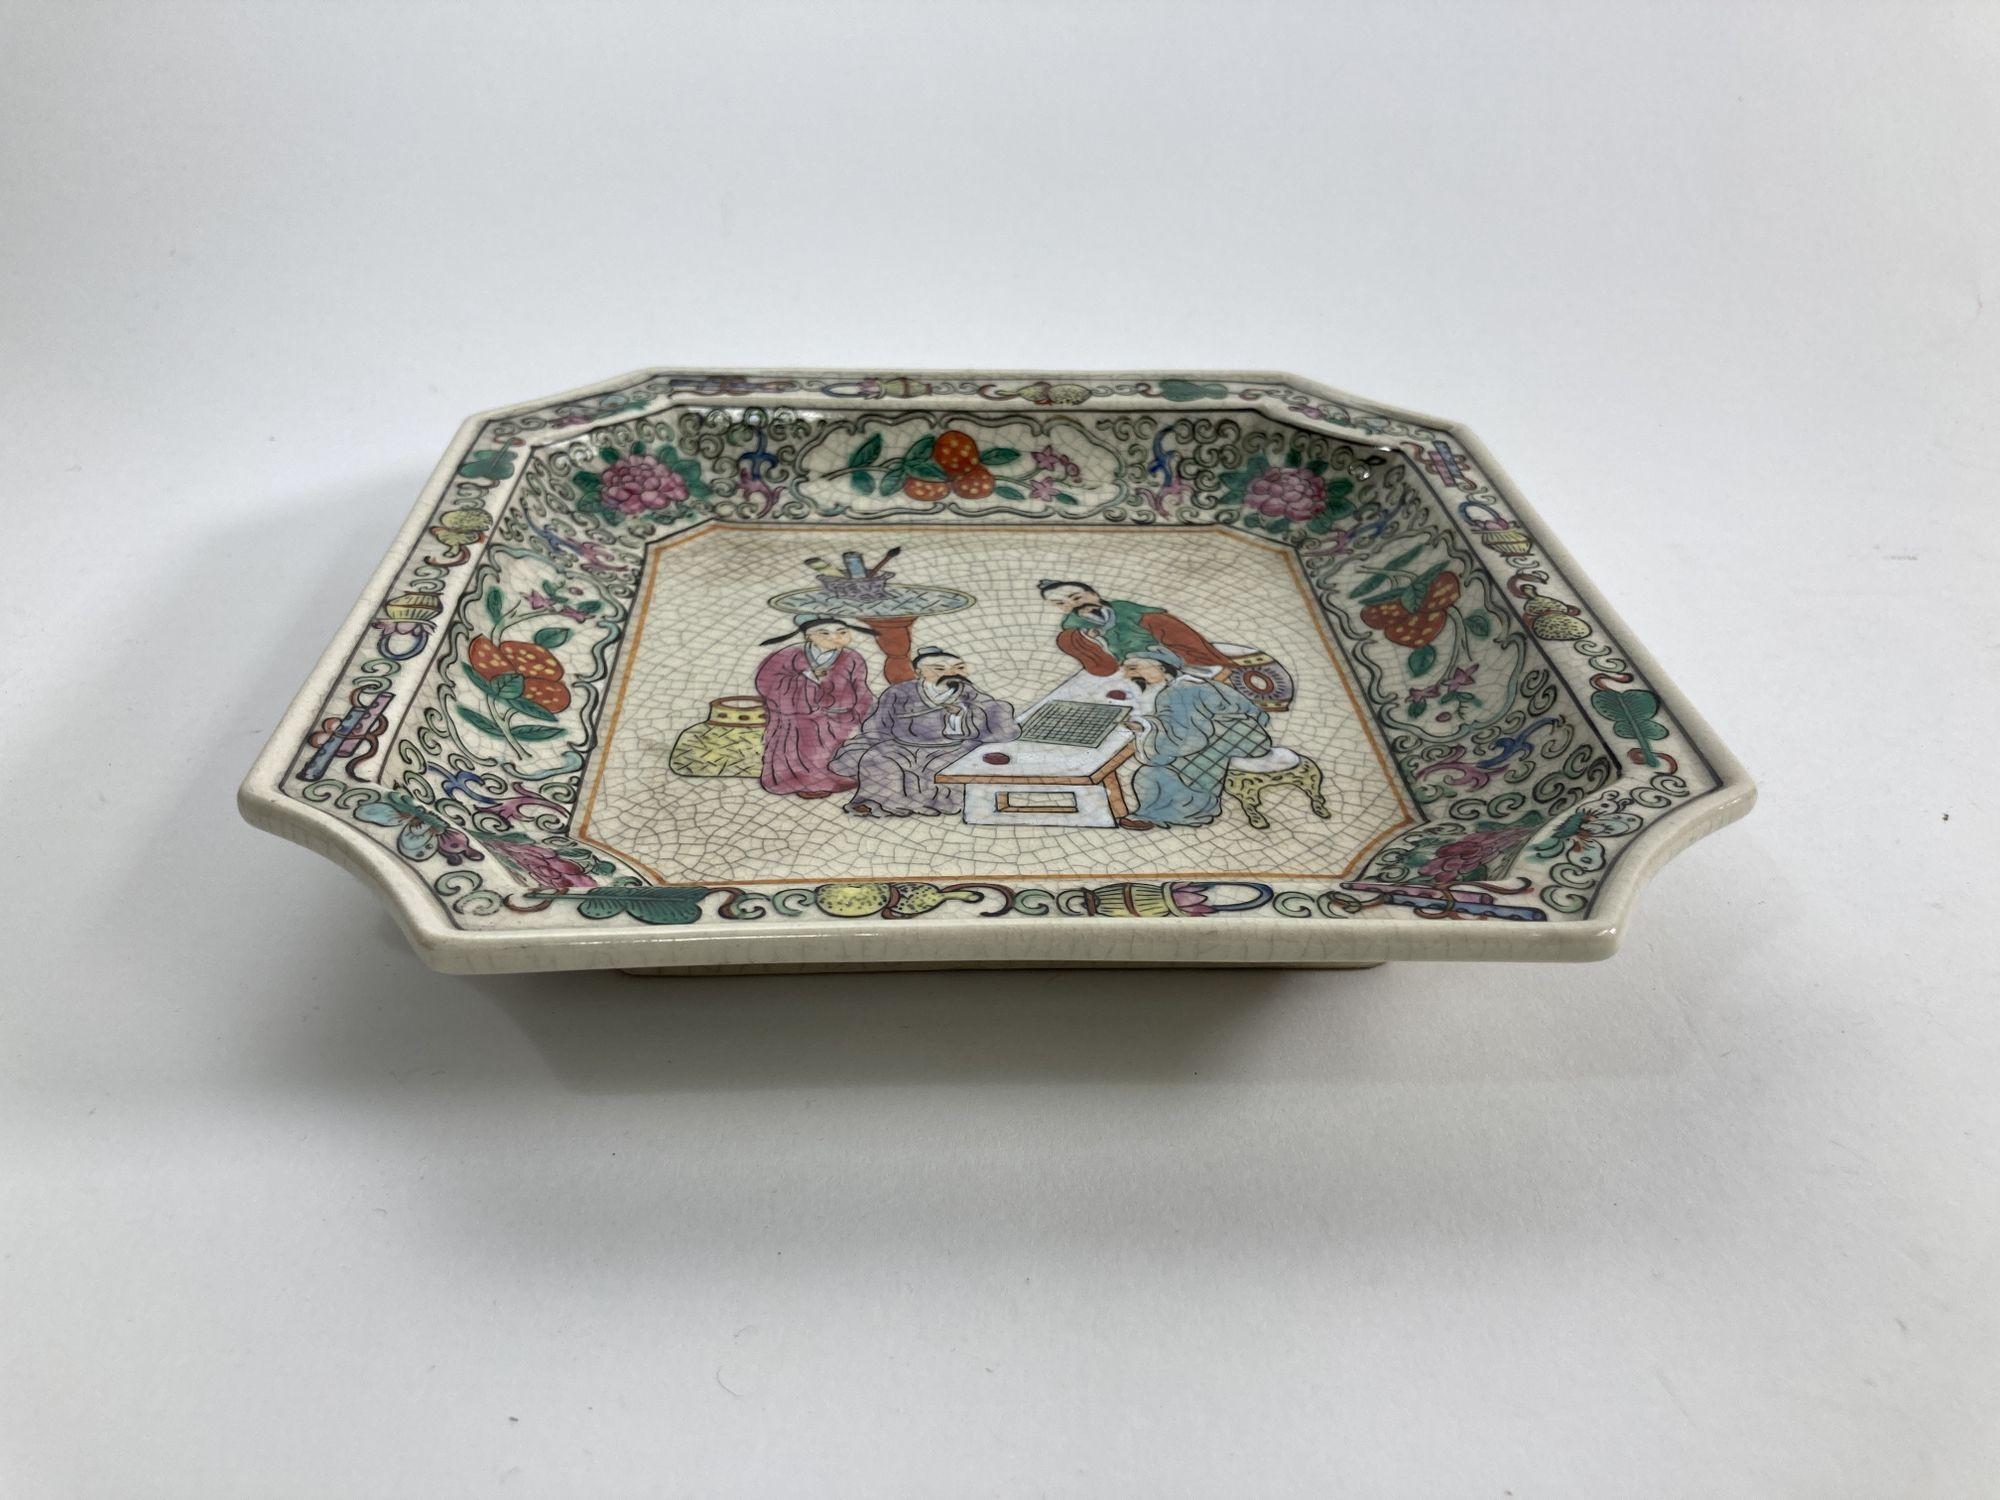 Vintage 1950s Asian style dish, ashtray, catchall.
Large vintage ornamental hand painted Chinoiserie porcelain tray/catchall with clipped edges.
Hand painted octagonal Chinoiserie porcelain dish displaying a finely detailed Asian figural scene